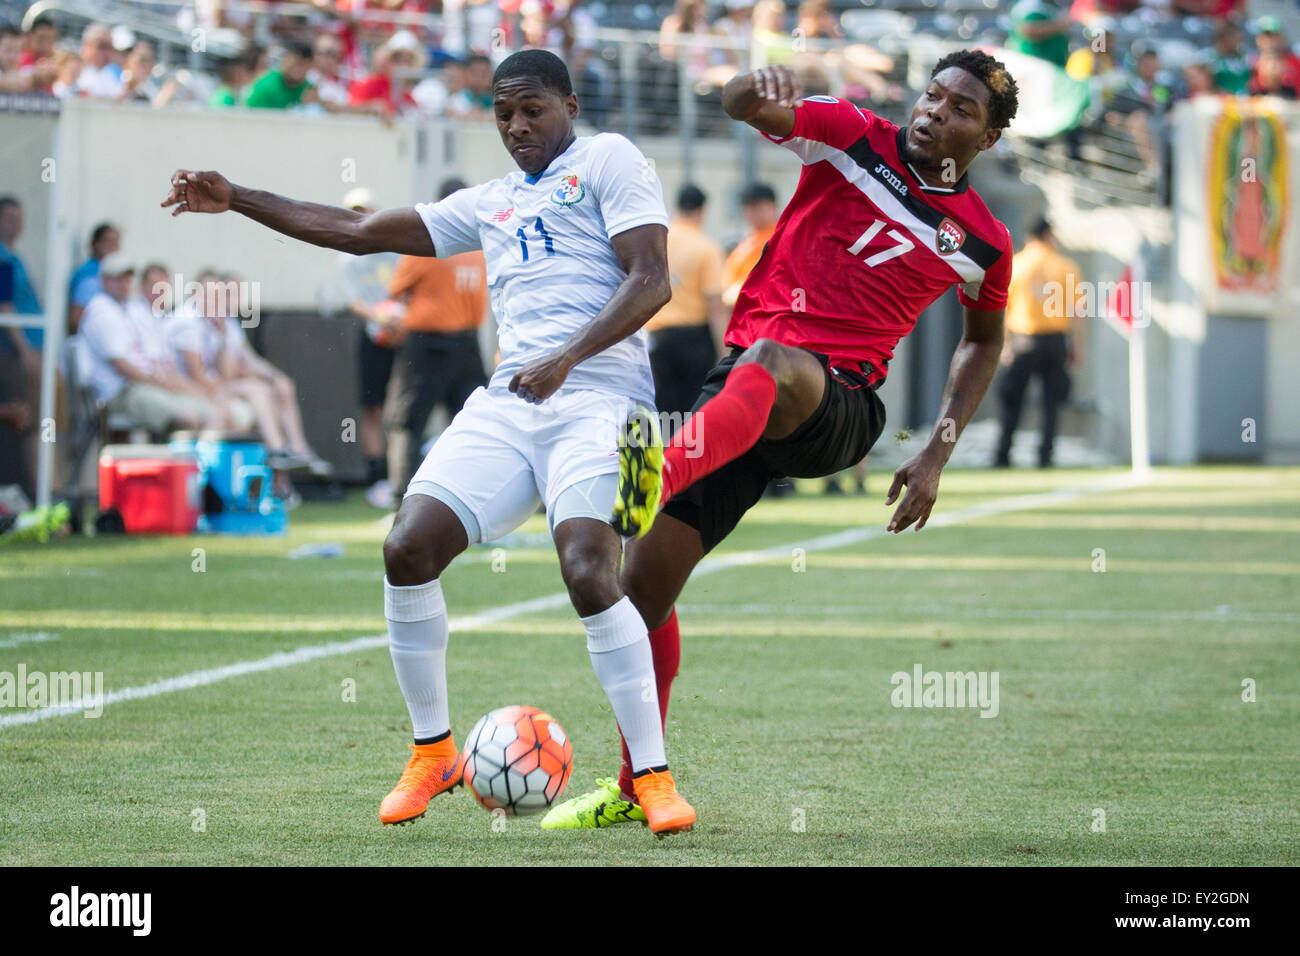 The Match By Shootout. 19th July, 2015. Panama midfielder Armando Cooper (11) battles for the ball with Trinidad & Tobago defense Mekeil Williams (17) during the CONCACAF Gold Cup 2015 Quarterfinal match between the Trinidad & Tobago and Panama at MetLife Stadium in East Rutherford, New Jersey. Panama won the match by shootout. (Christopher Szagola/Cal Sport Media) © csm/Alamy Live News Stock Photo